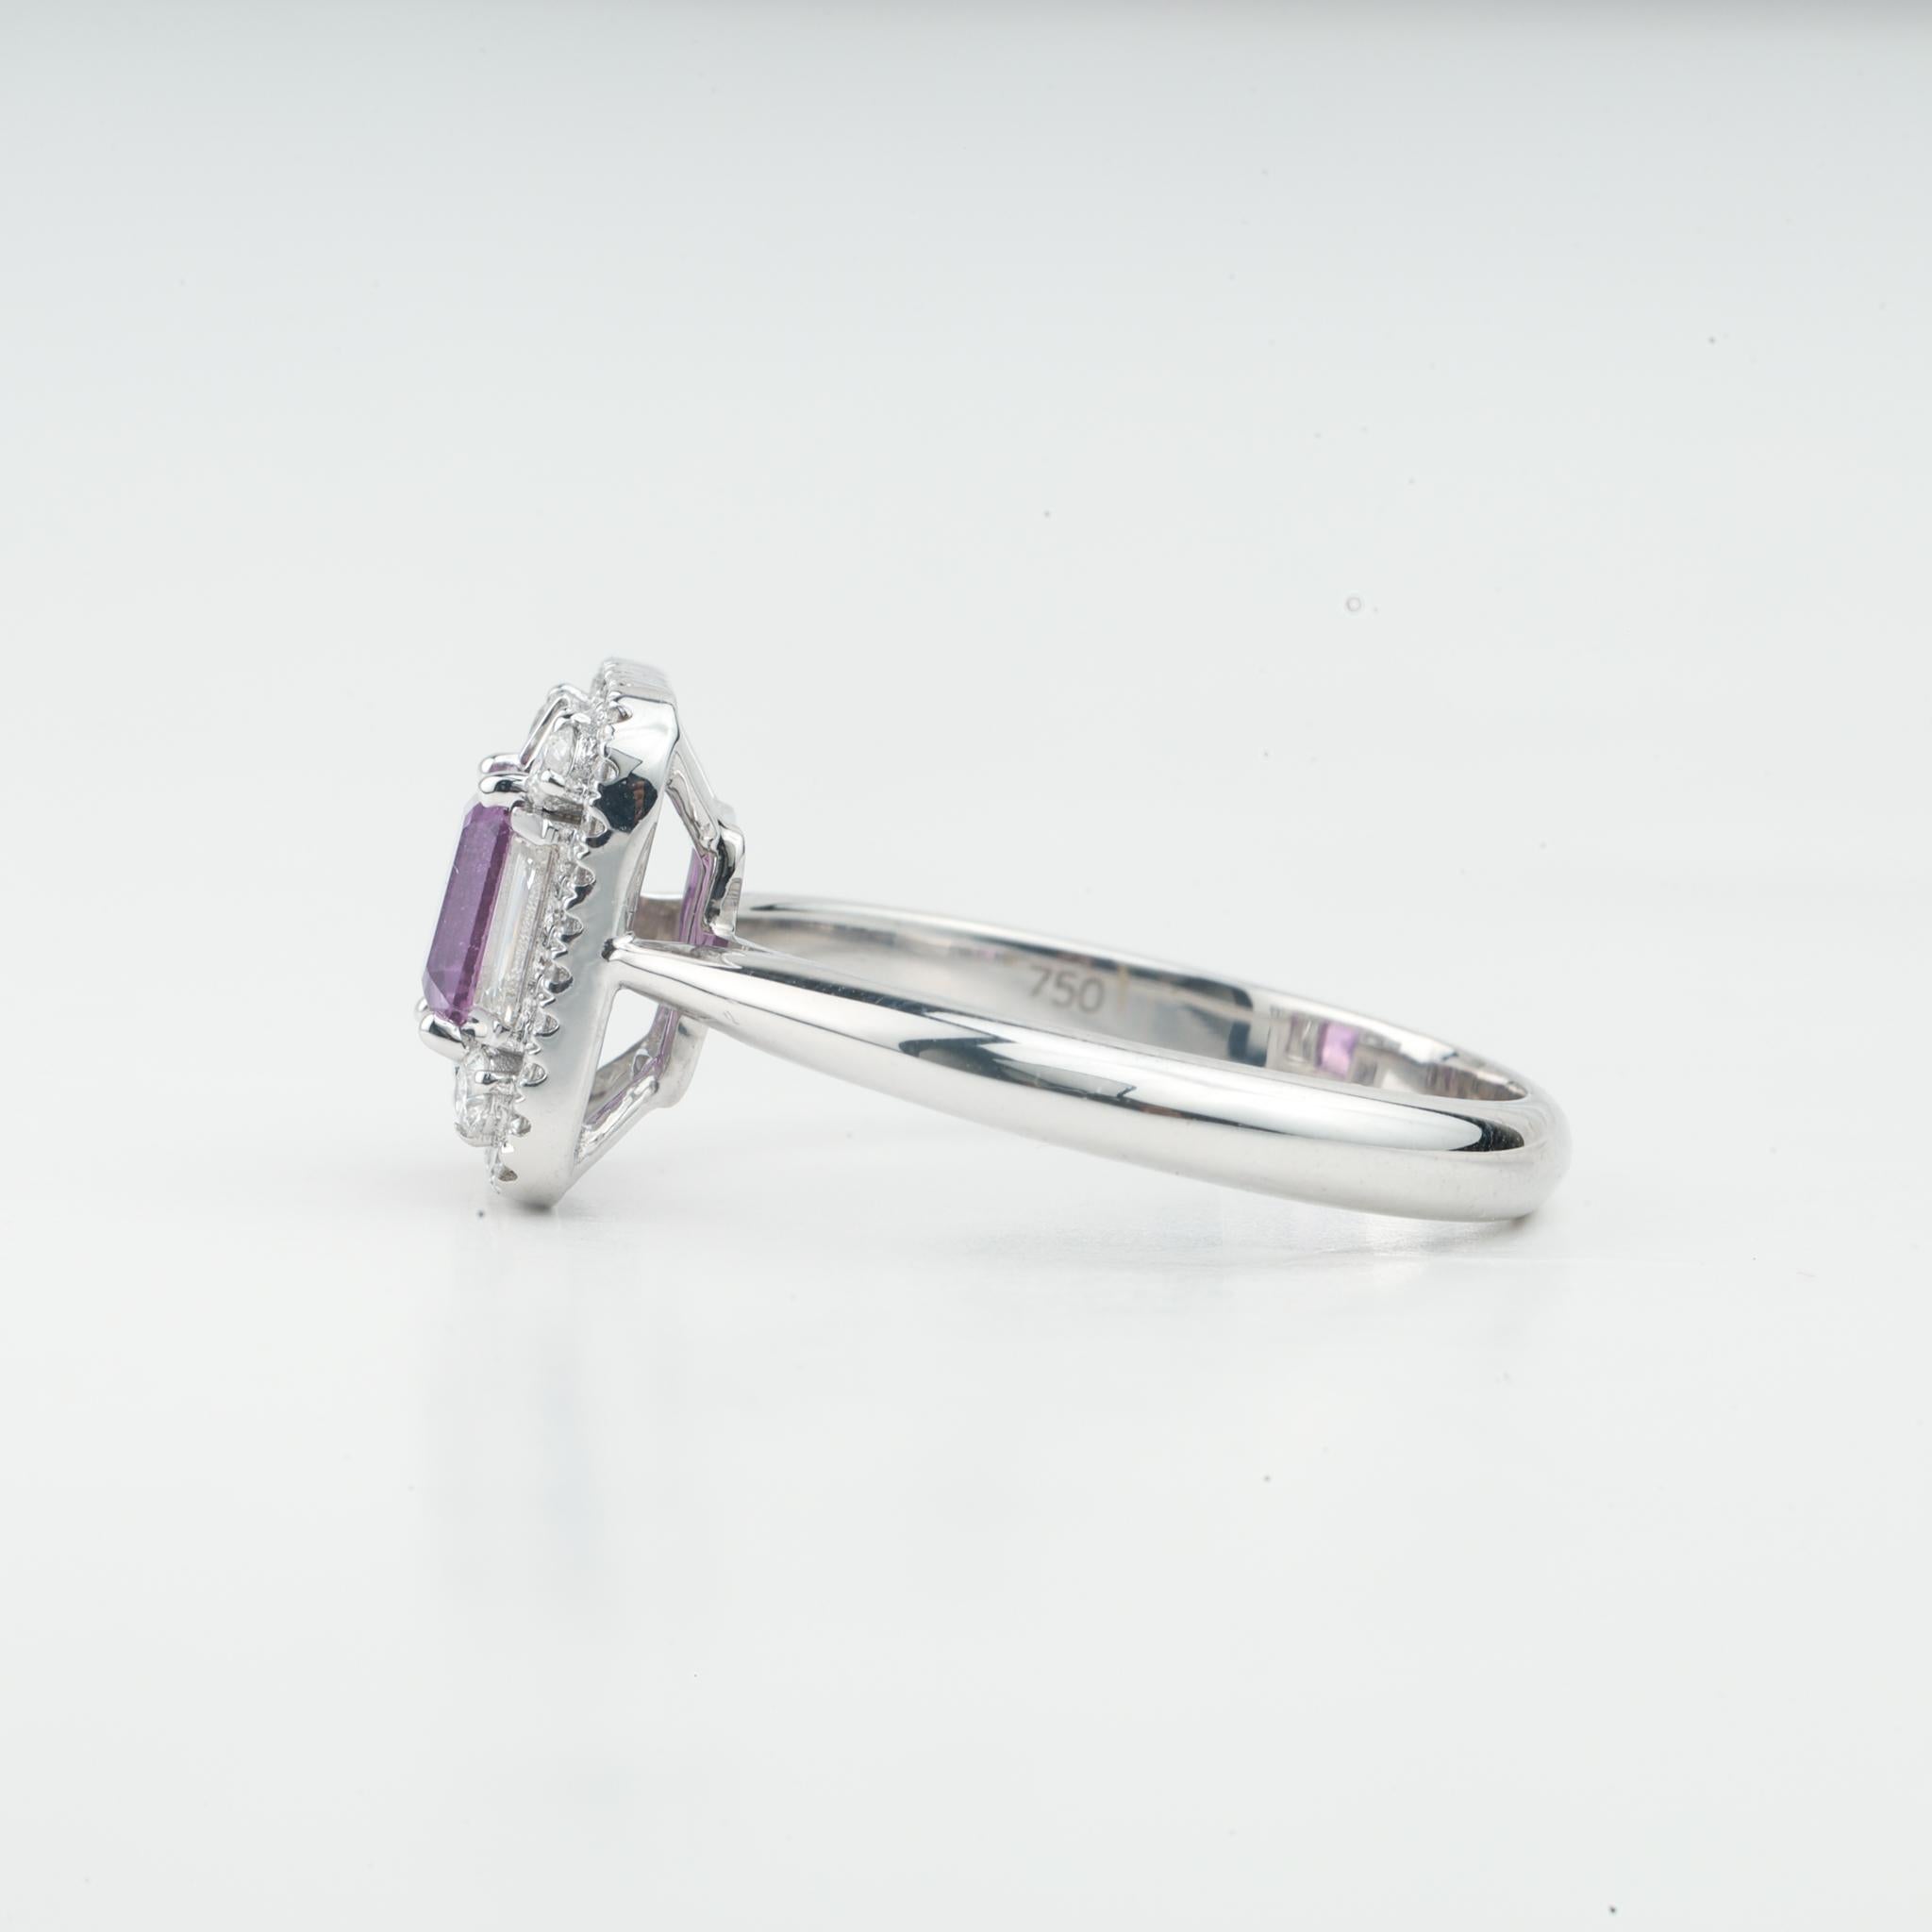 Art Deco 1 Carat Pink Sapphire Diamond Cocktail Engagement Ring in 18k White Gold For Sale